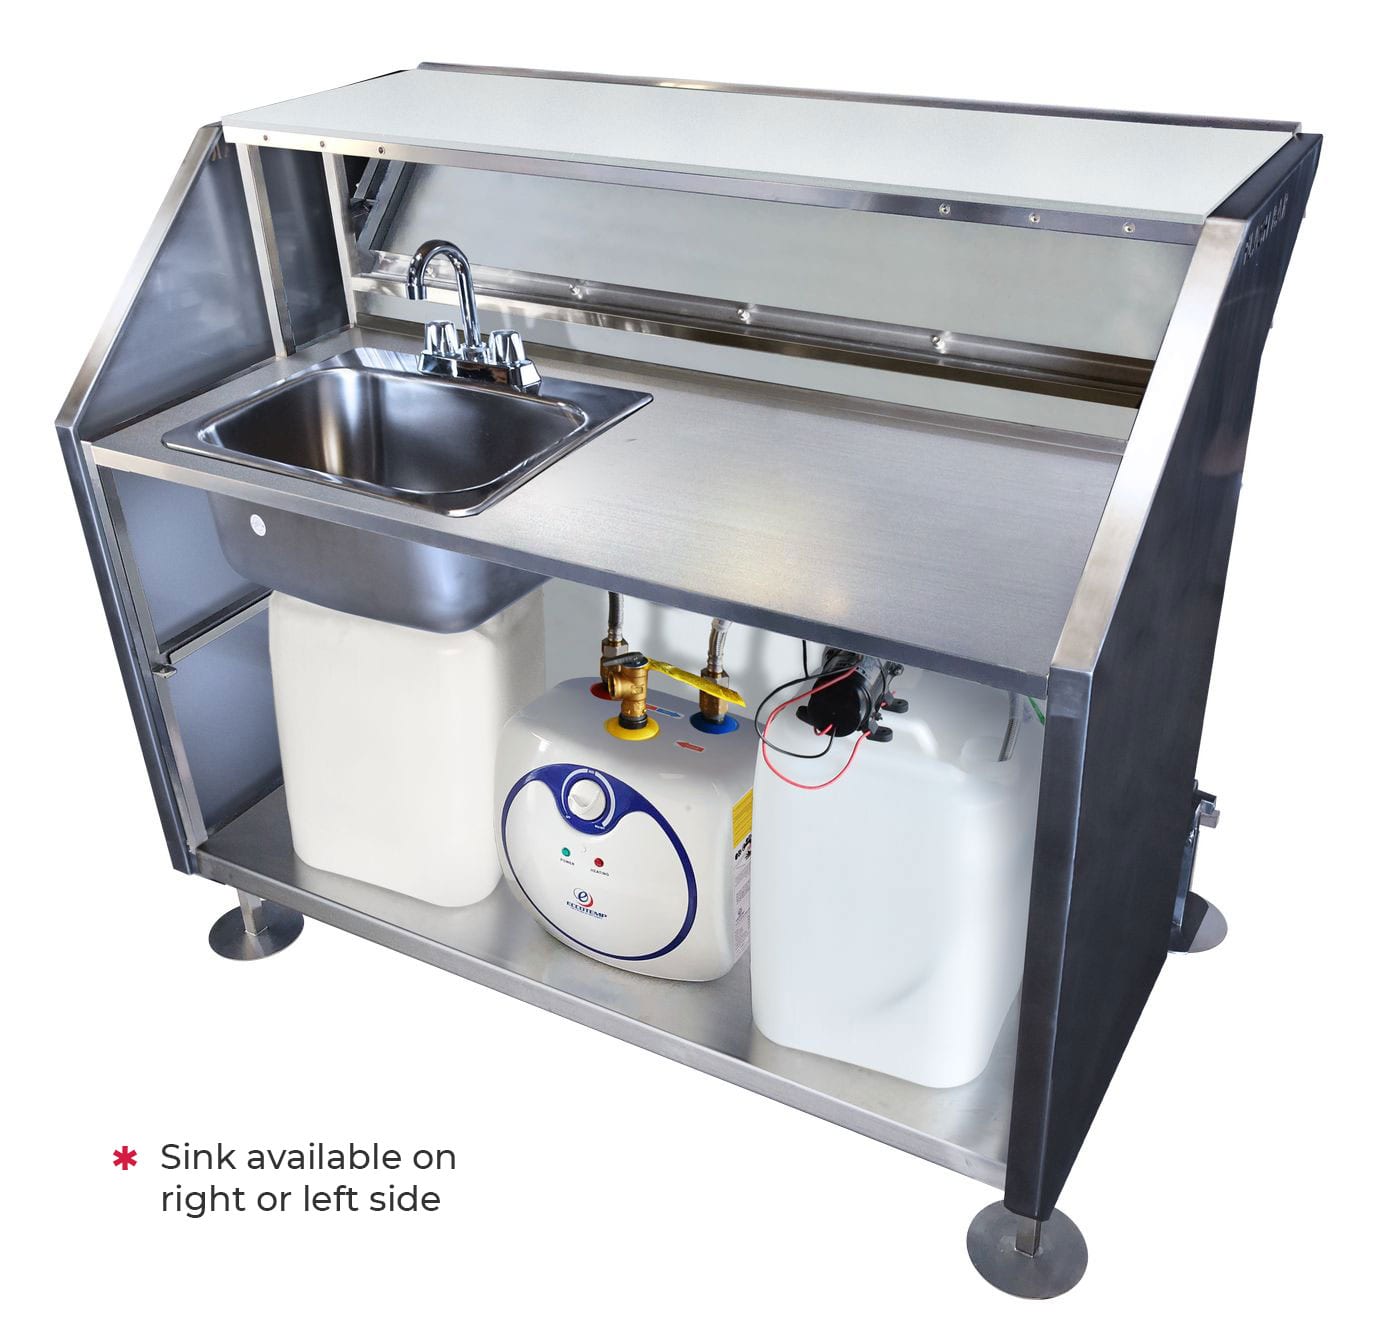 Full Self Contained Hand Washing Station with Left Handed Sink